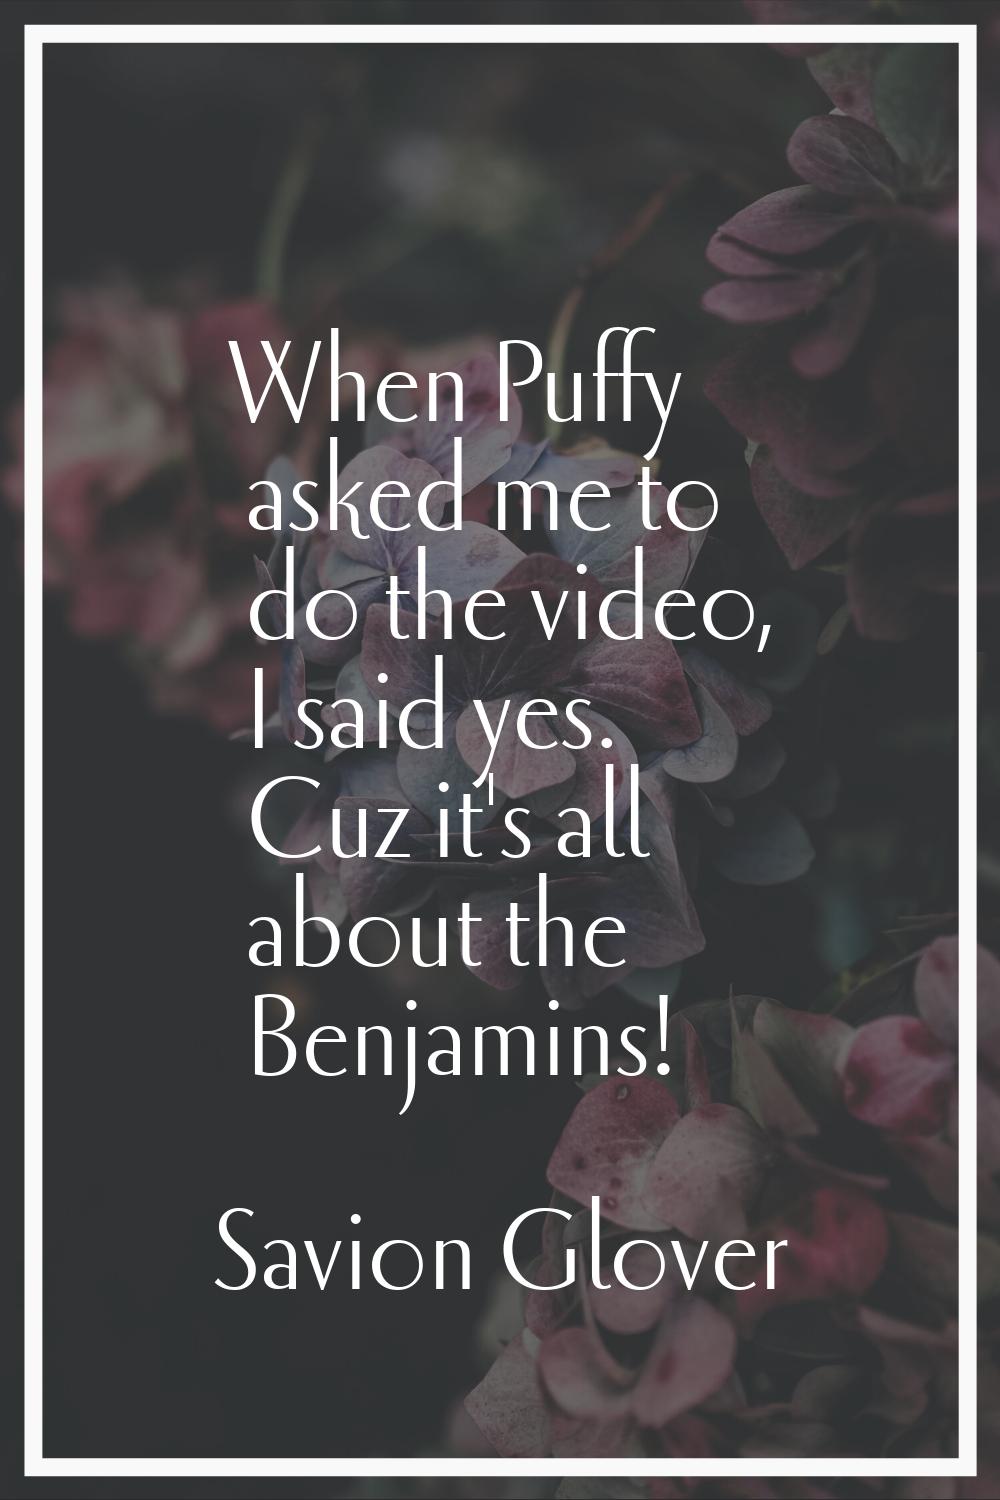 When Puffy asked me to do the video, I said yes. Cuz it's all about the Benjamins!